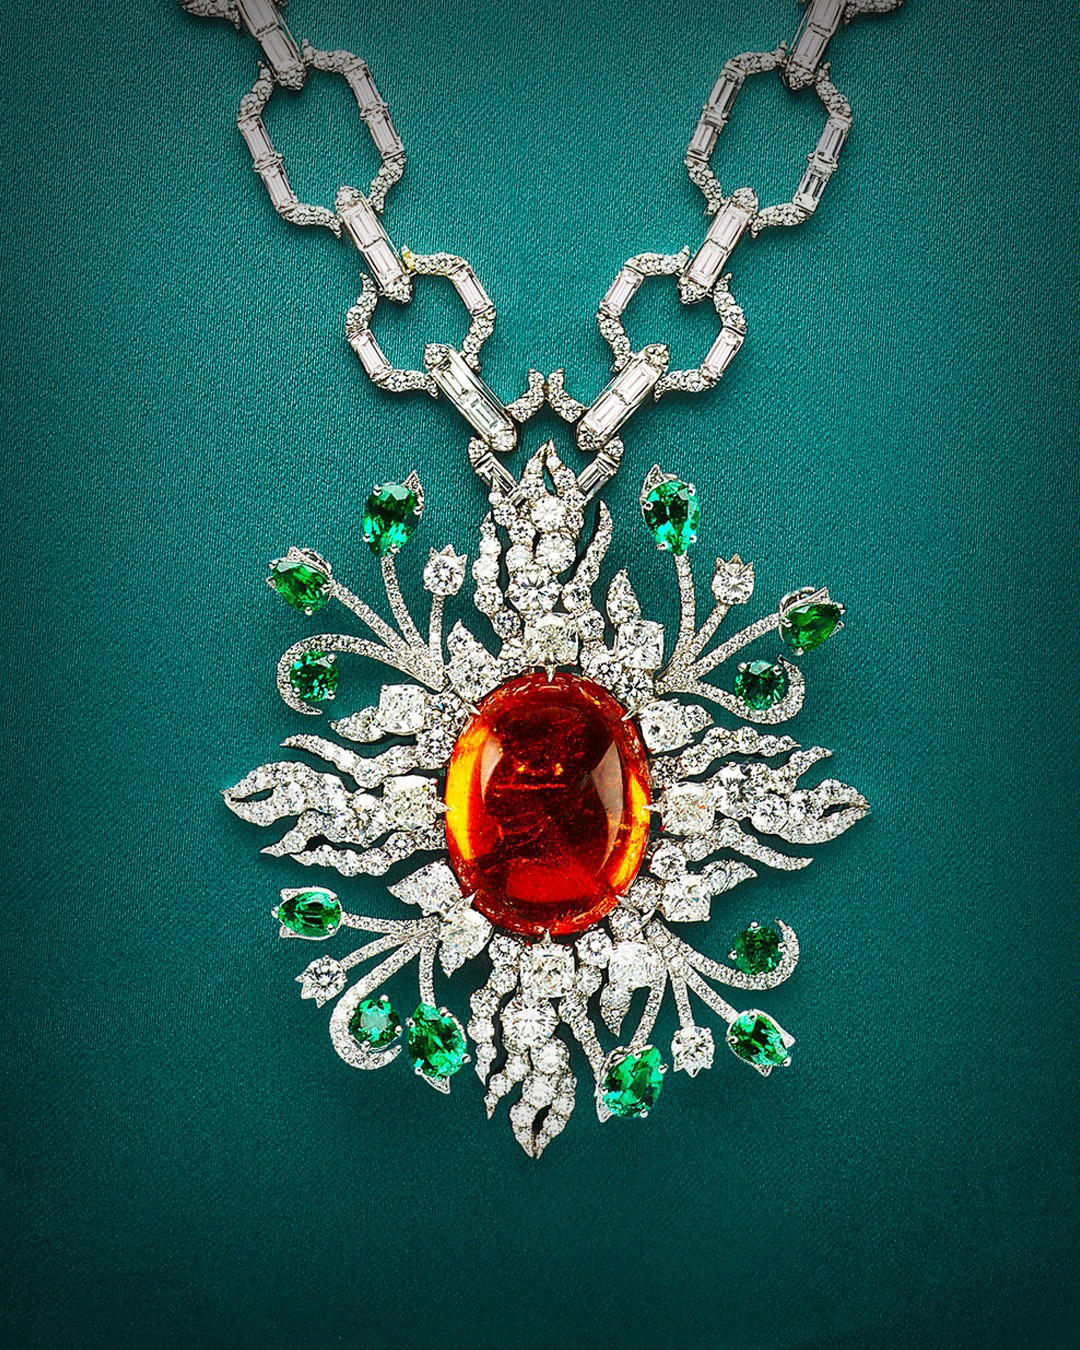 Meaning ‘Garden of Delights’ in Latin, the Hortus Deliciarum High Jewelry collection sees the House’